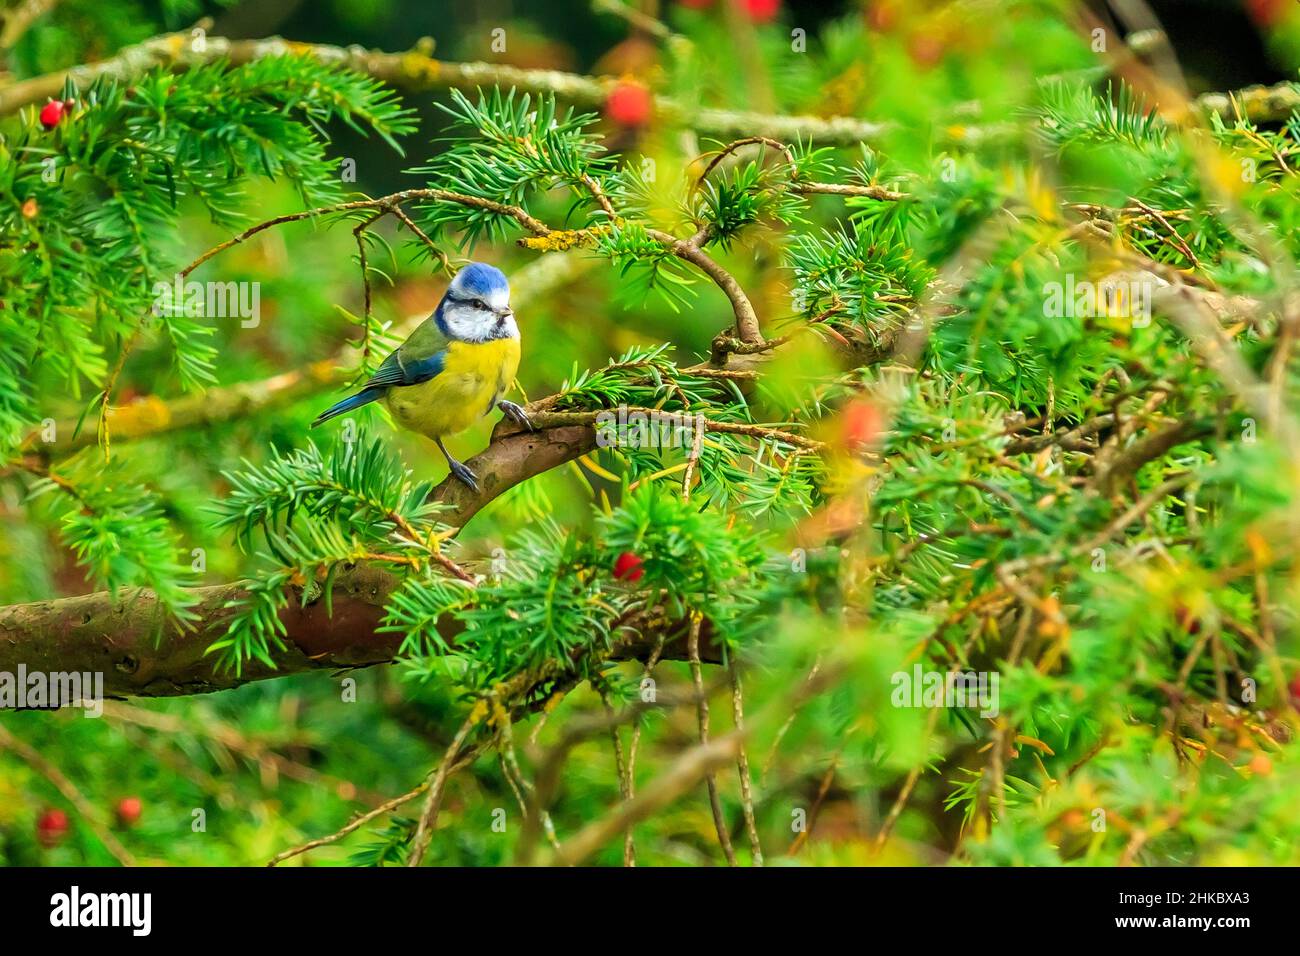 A gorgeous blue tit perched on a branch Stock Photo